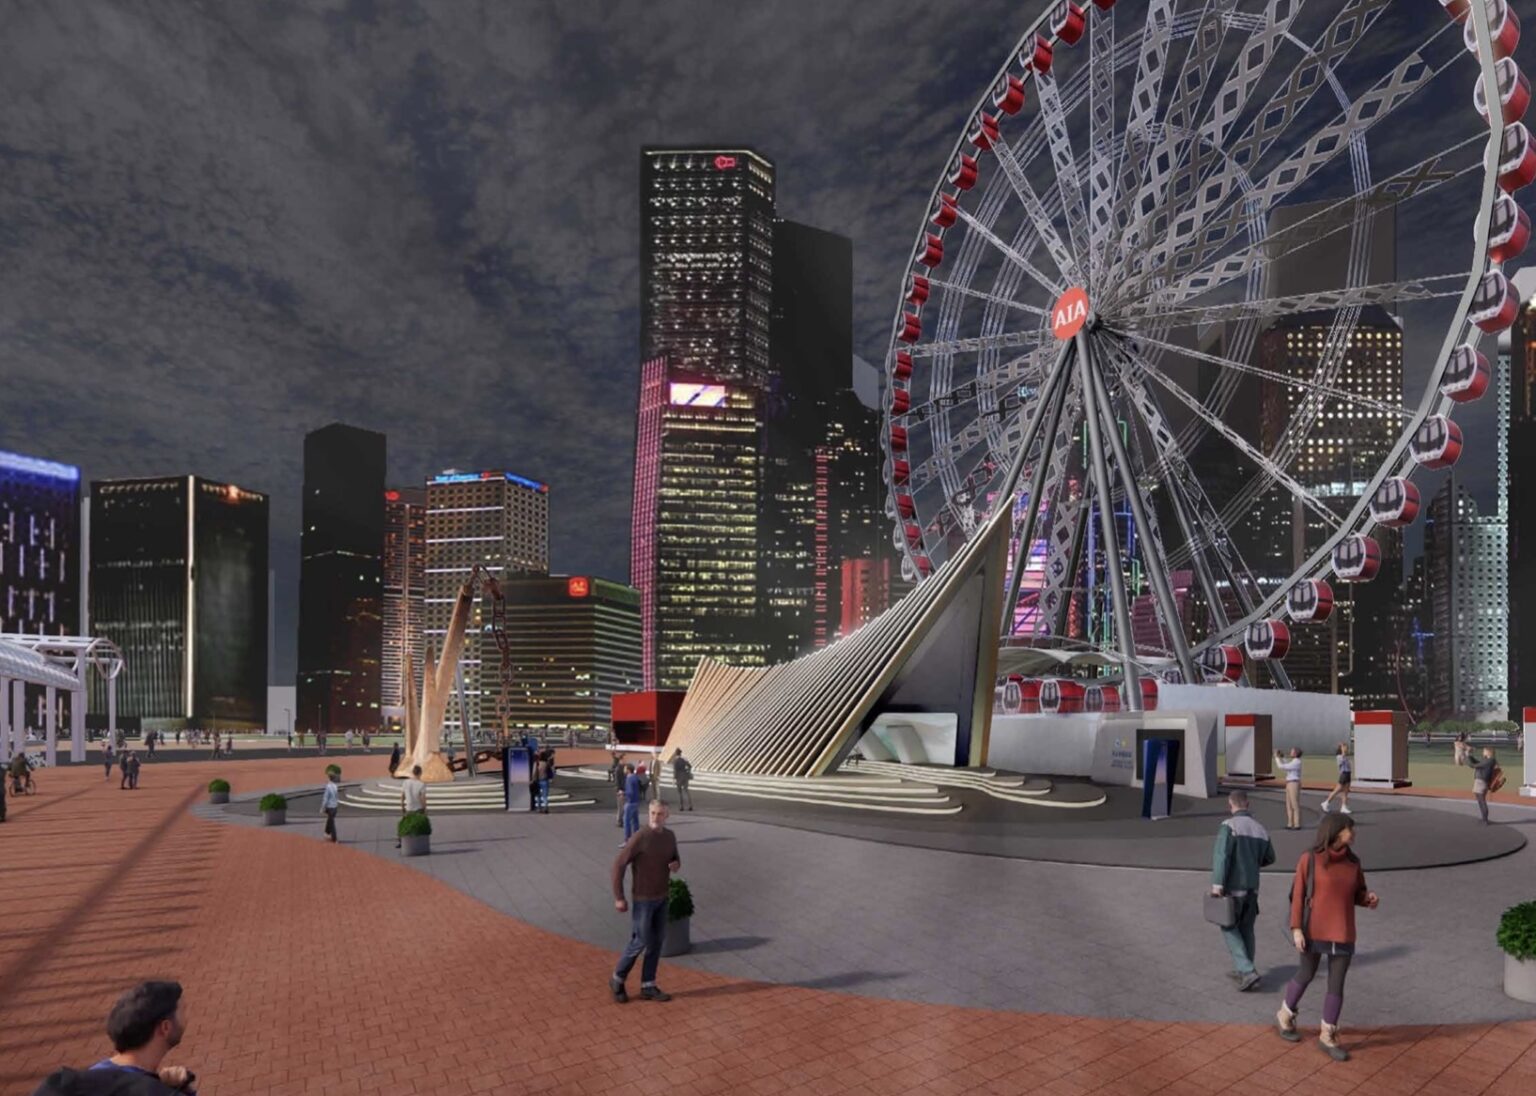 an artist's impression of the new visitor centre and anchor display at hong kong's central harbourfront